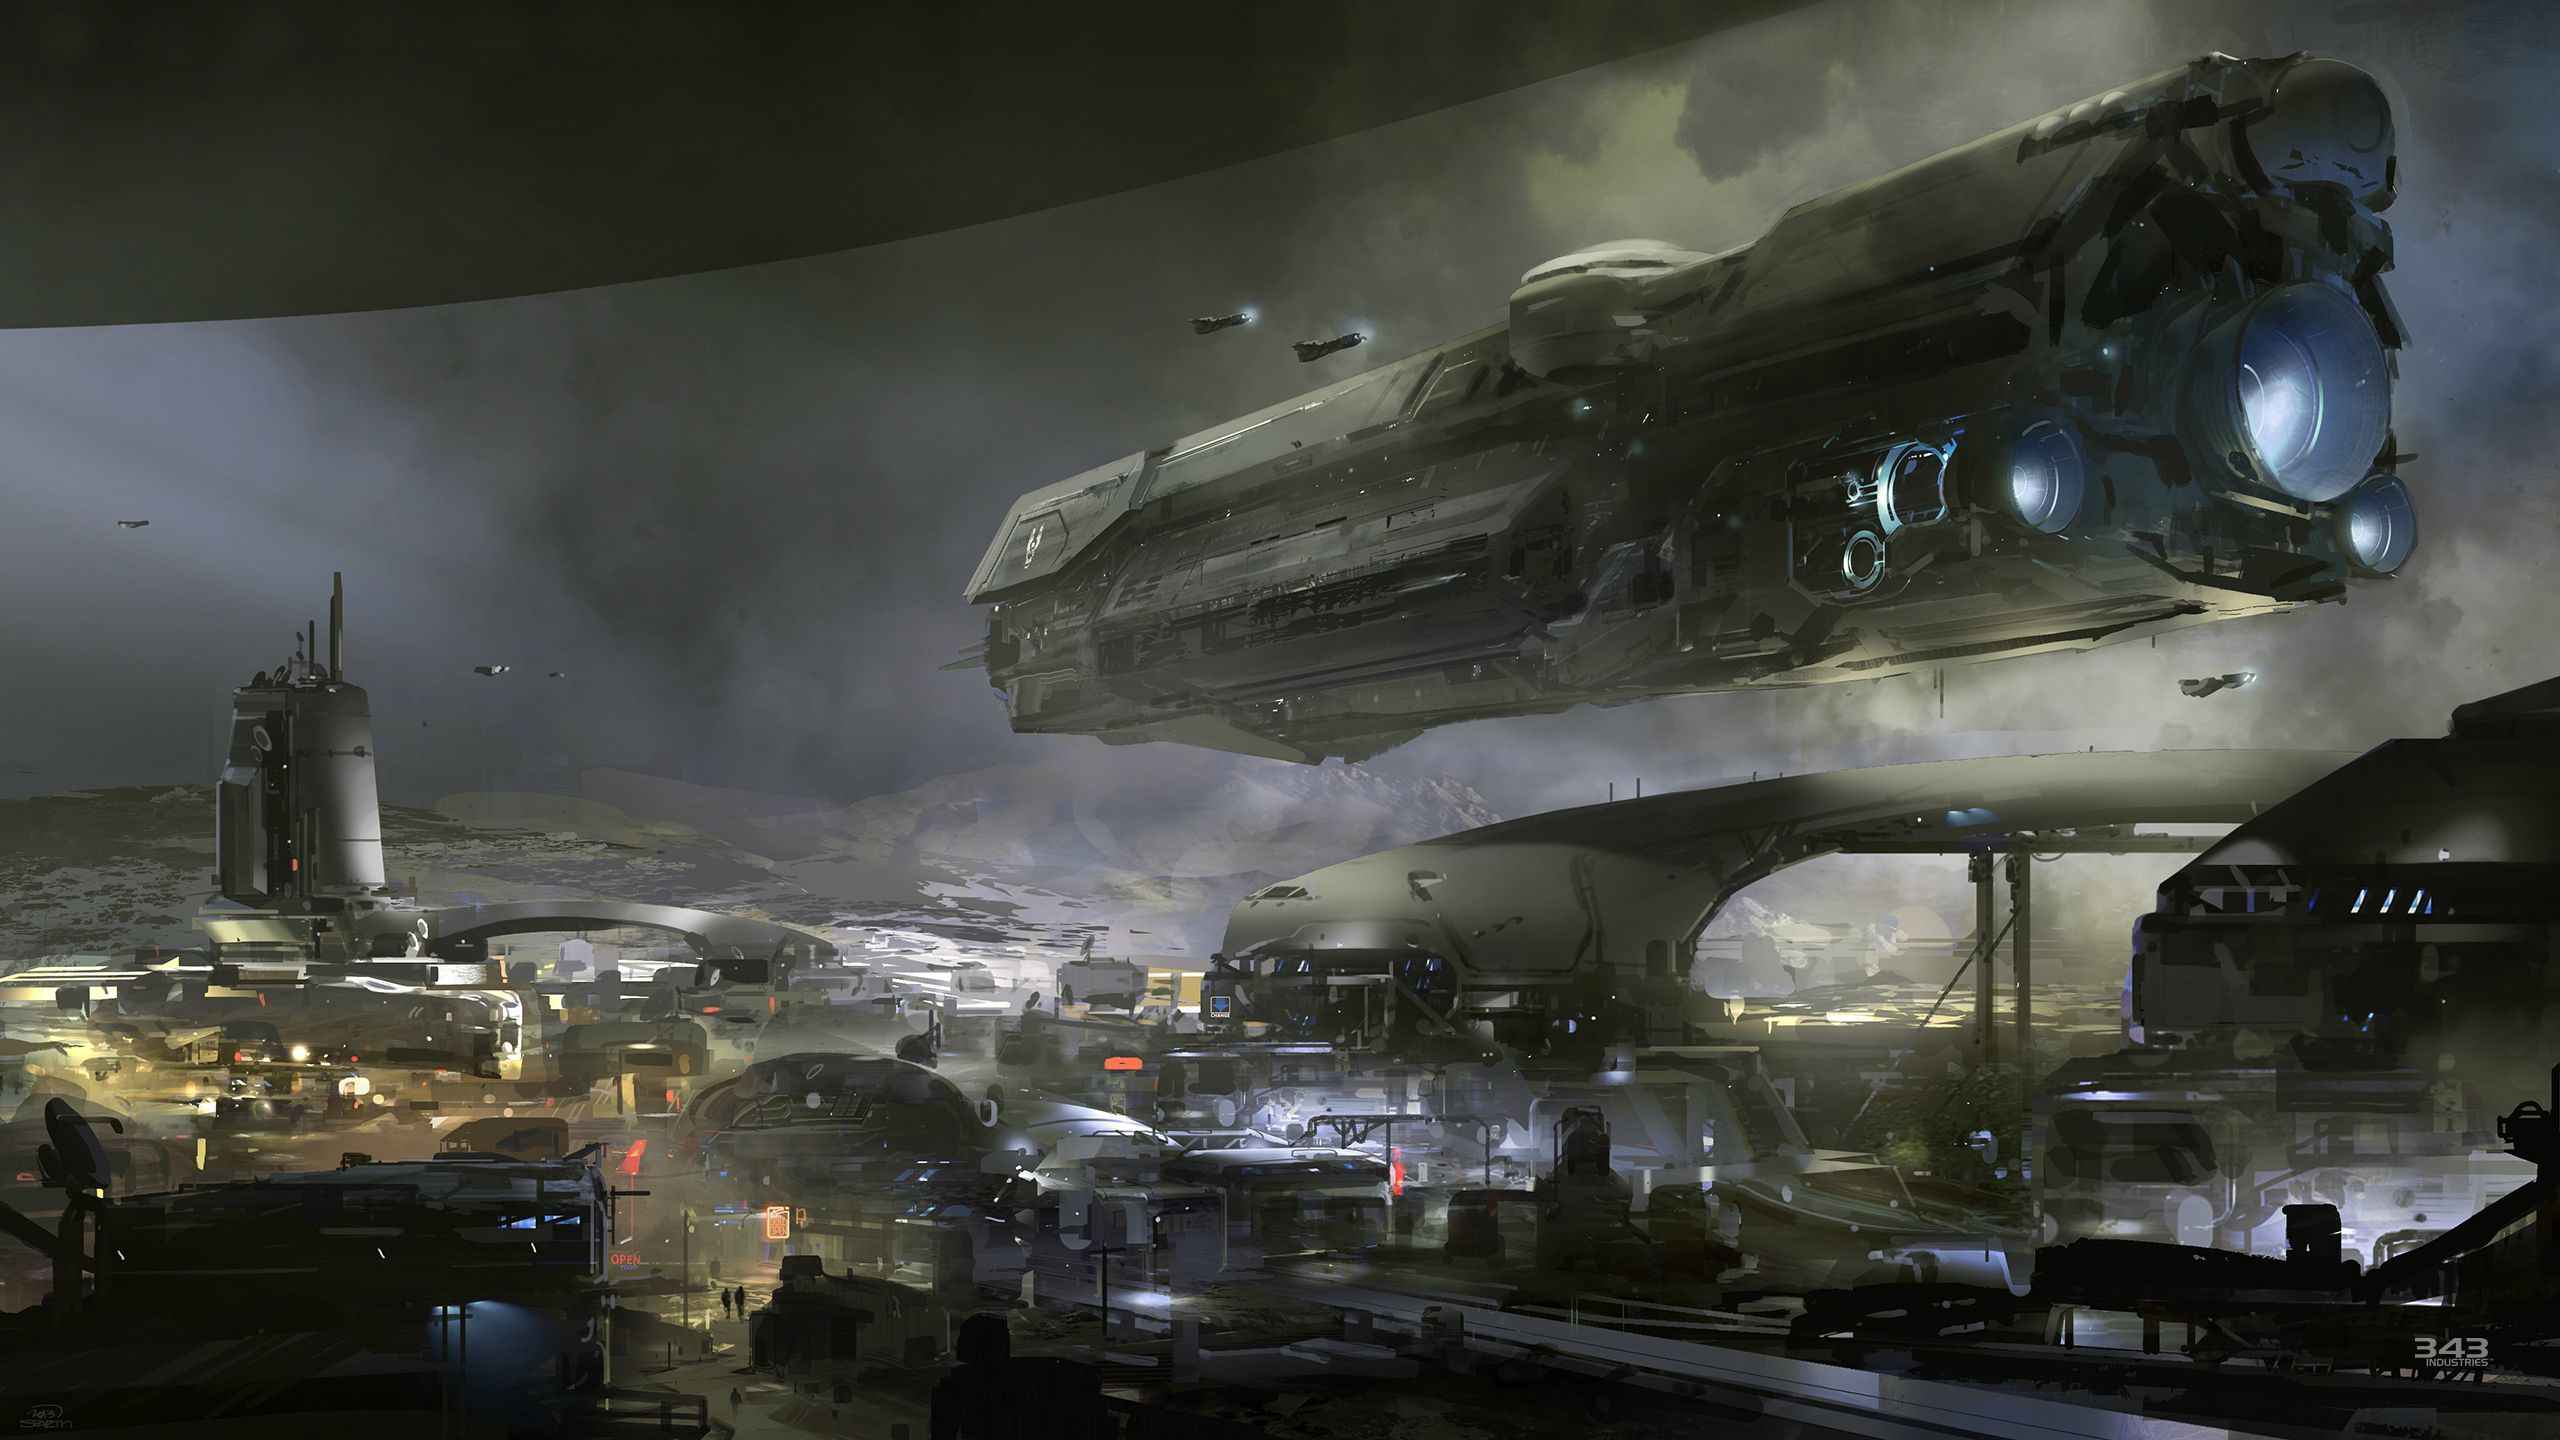 Halo 5 Concept Art, Most Likely UNSC Infinity, By Nicolas “Sparth” Bouvier [2560 X 1440] (x Post R Halo)